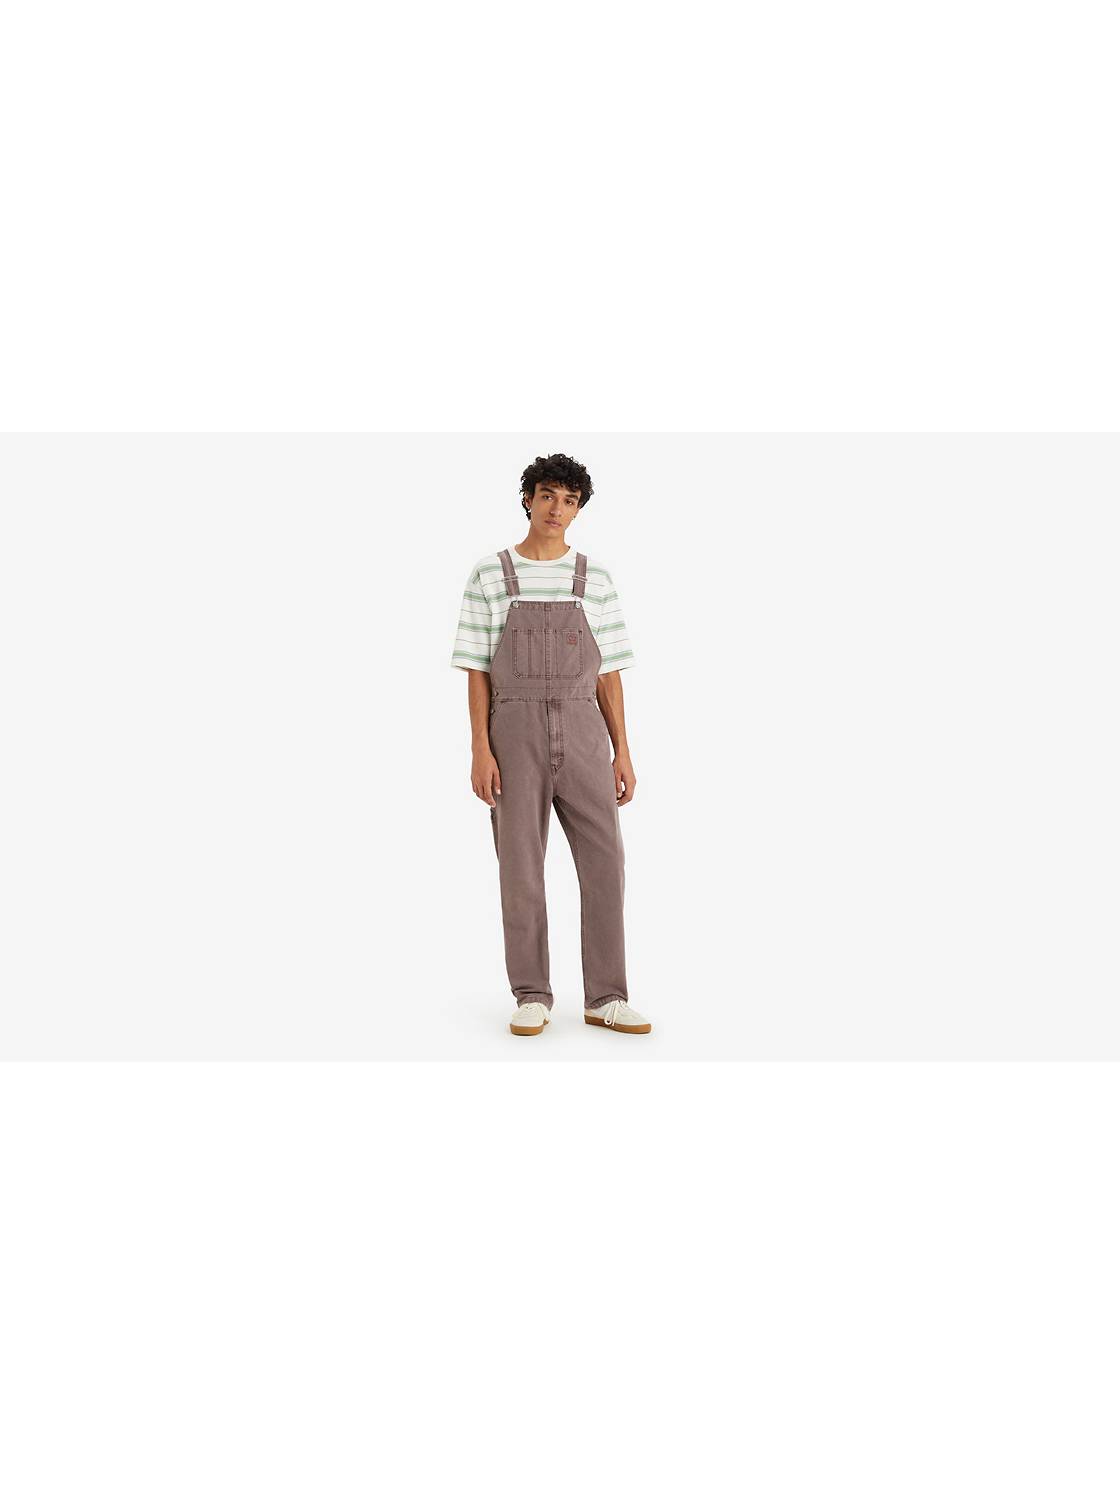 Levi's® Red Tab™ Overalls 1